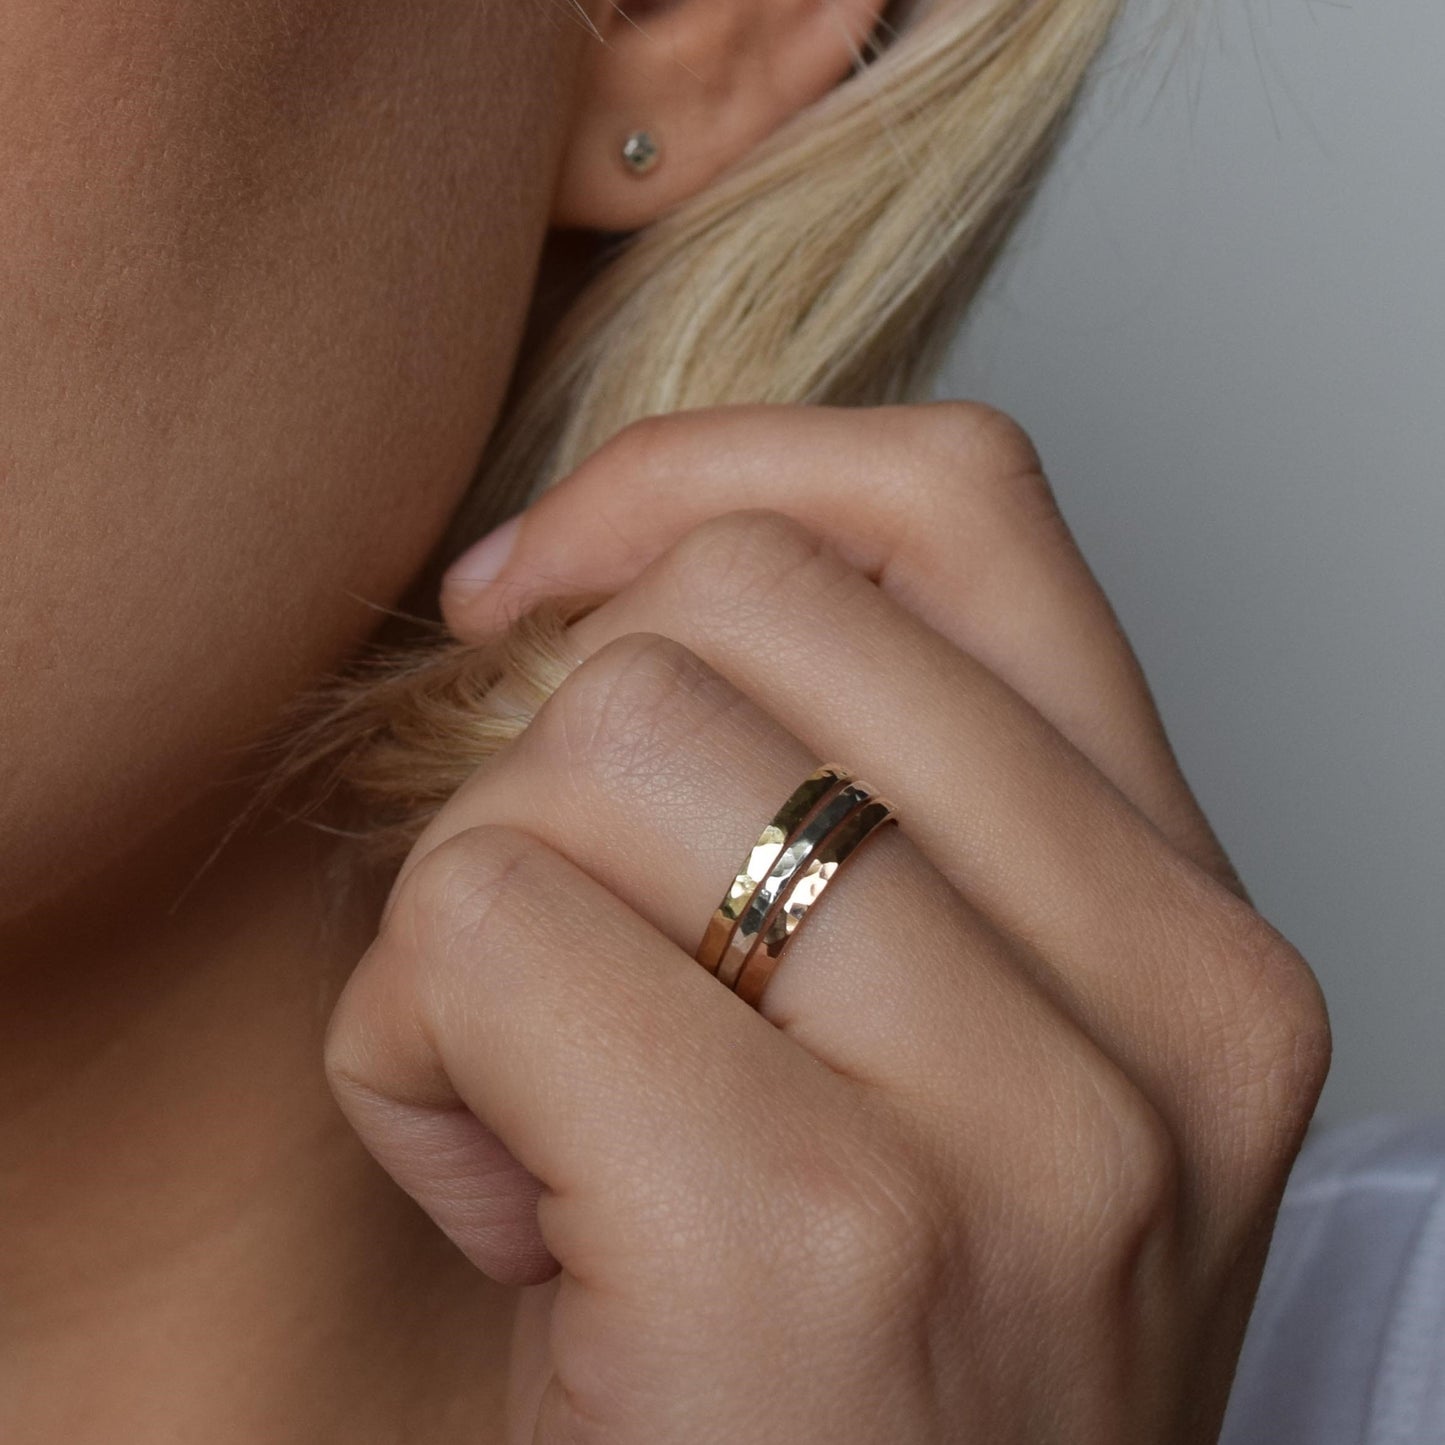 Trio of stacking rings worn by model on ring finger